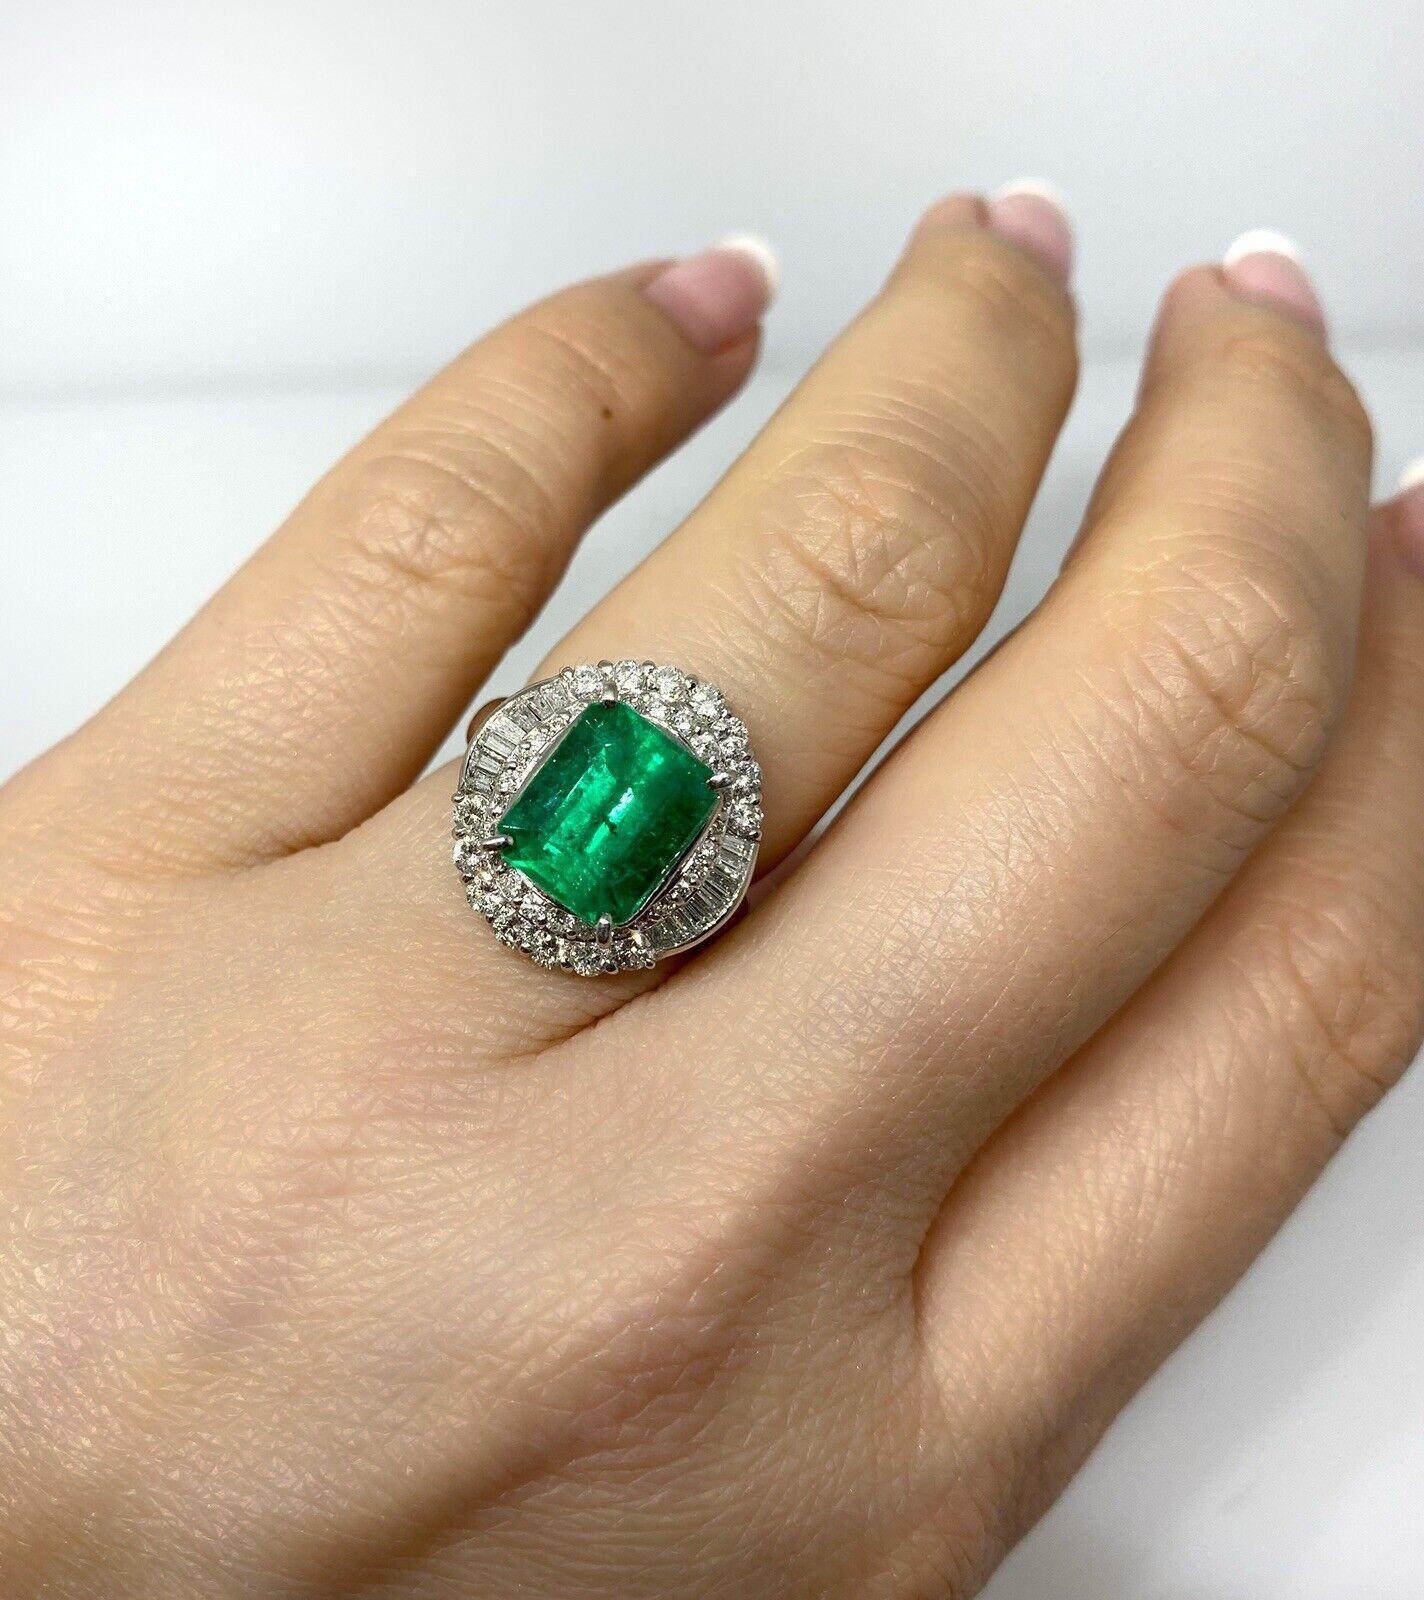 GIA Certified 3.07 carats Colombian Emerald & Diamond in Platinum

Emerald and Diamond Ring features a 3.07 carat Natural Colombian Emerald with Baguettes and Round Brilliant Diamonds set in a Platinum Ballerina setting.

The emerald is of Colombian